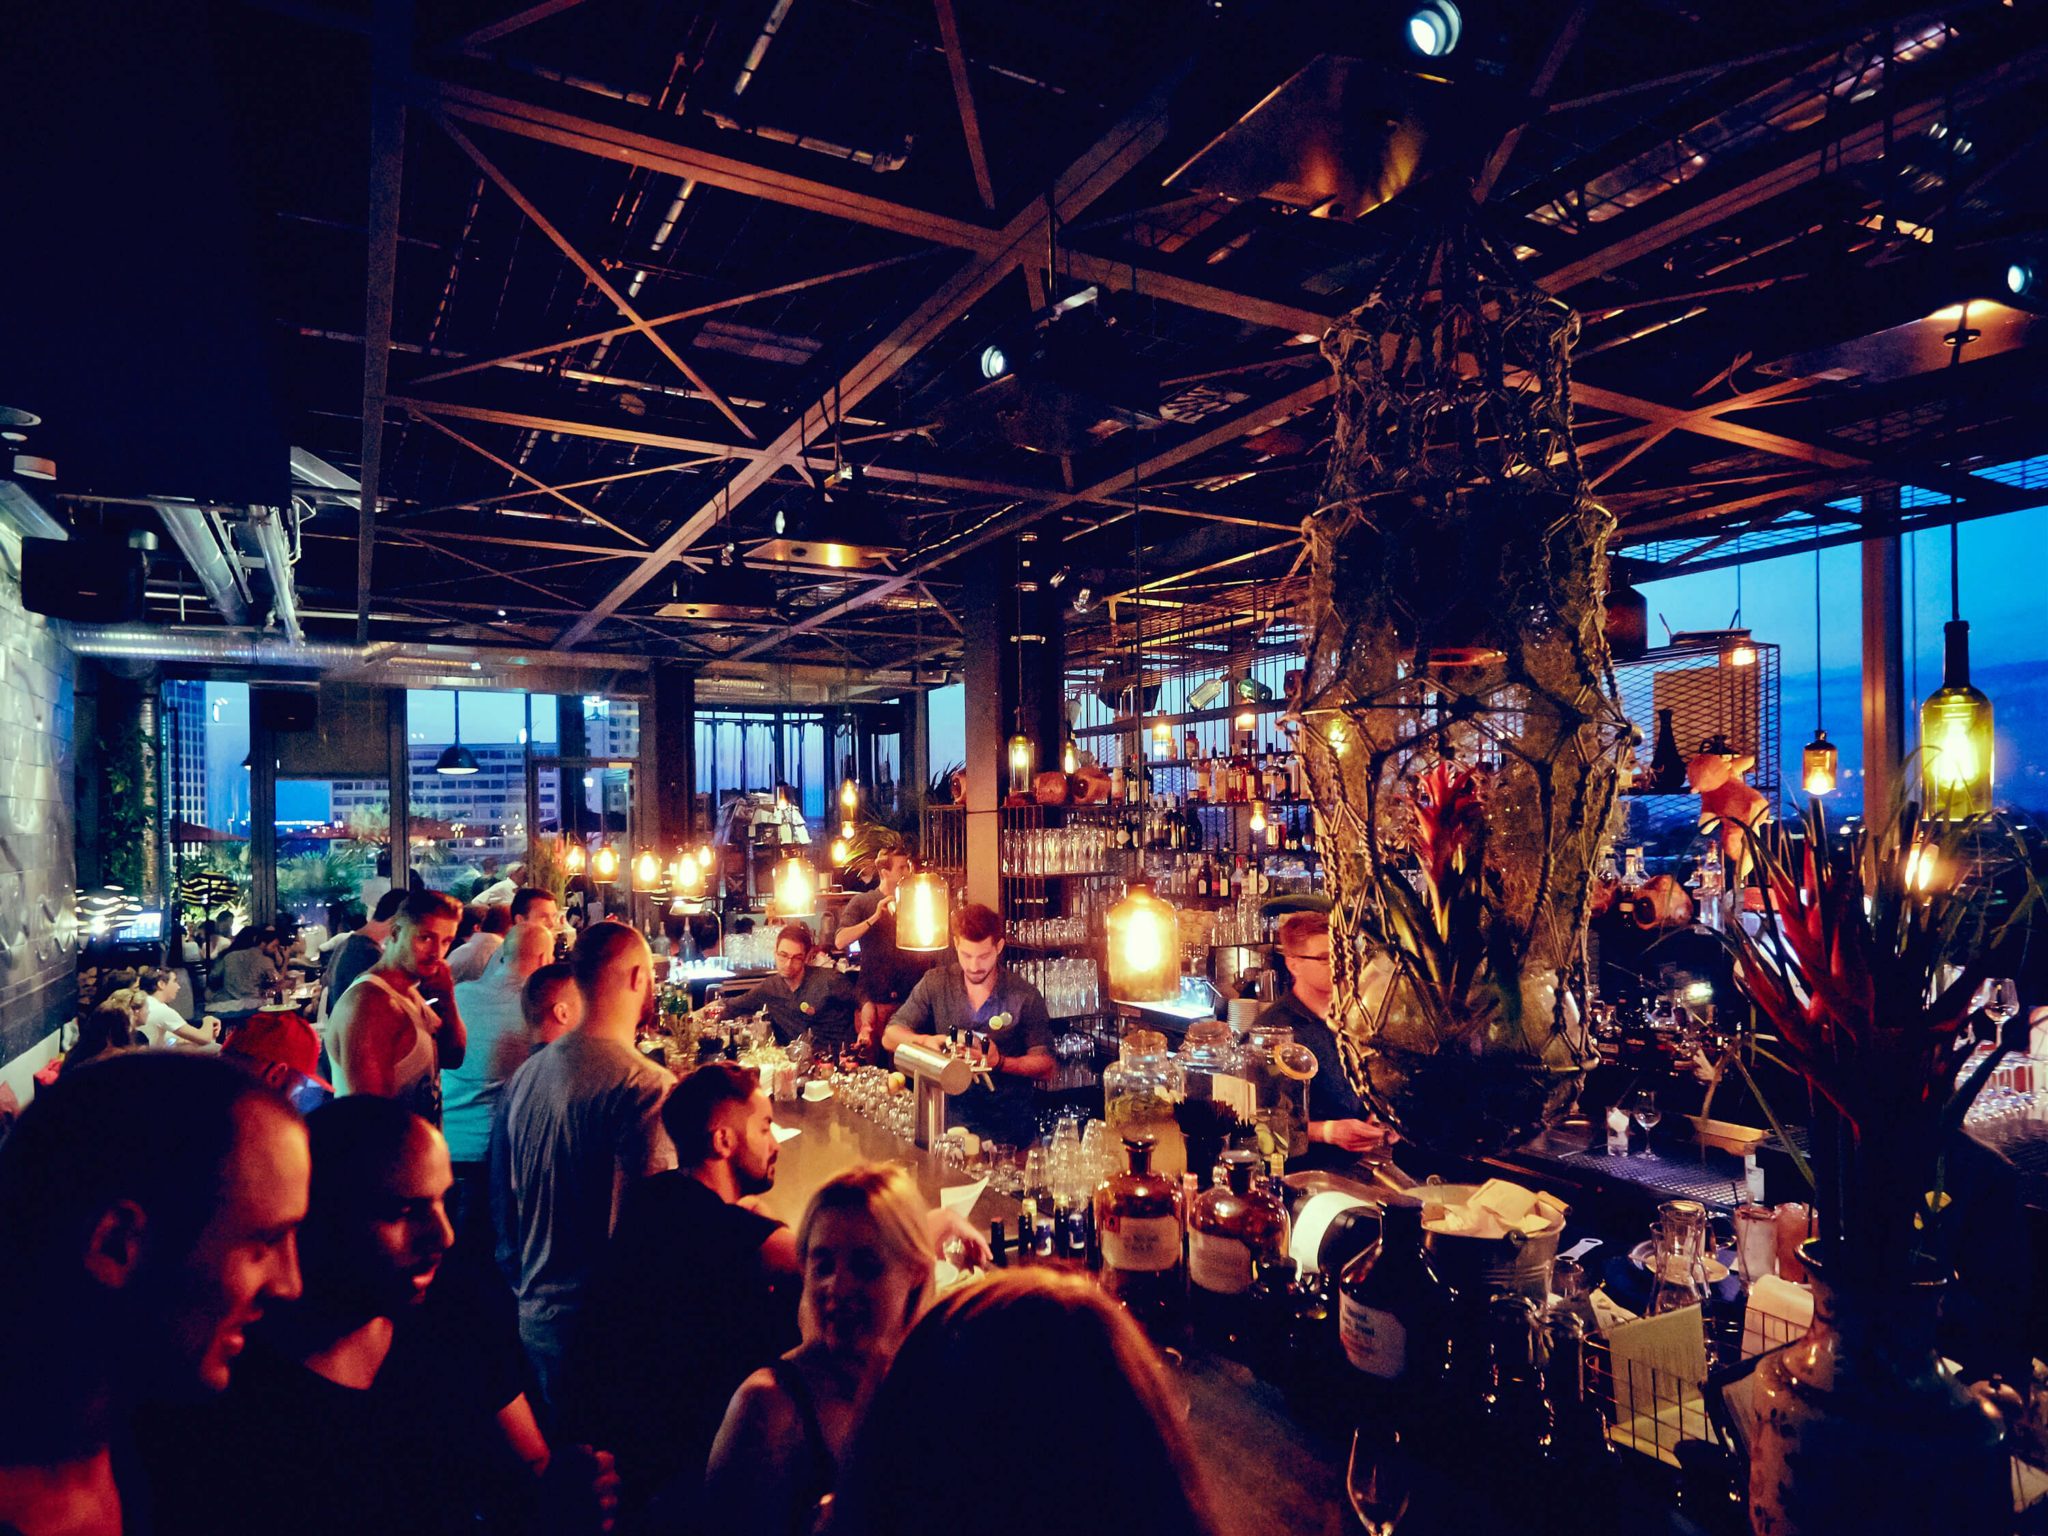 MONKEY BAR: one of the best bars in Berlin - Thomas Henry